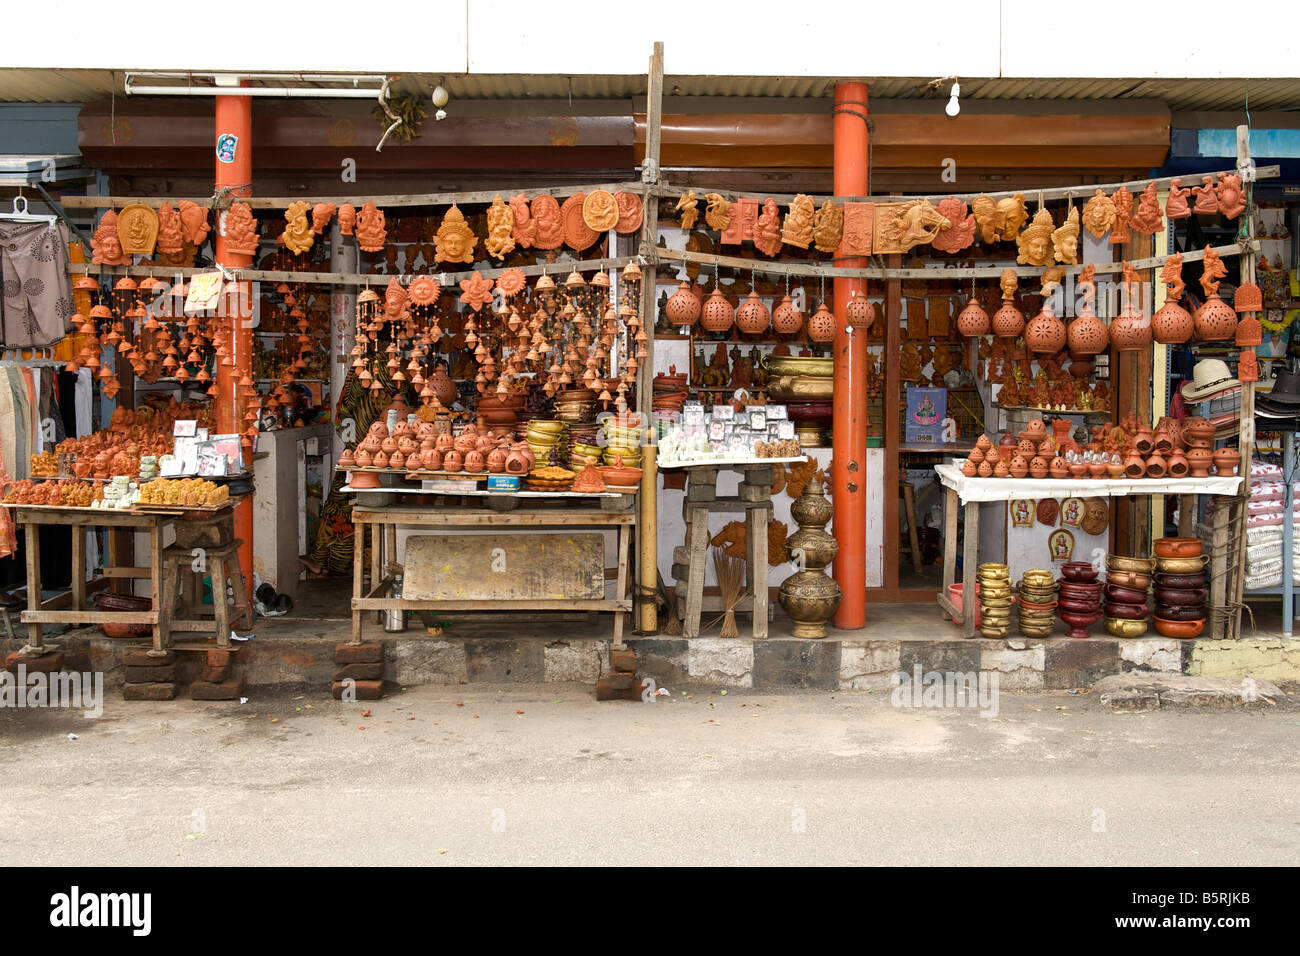 Pottery and curios for sale in Pondicherry India. Stock Photo